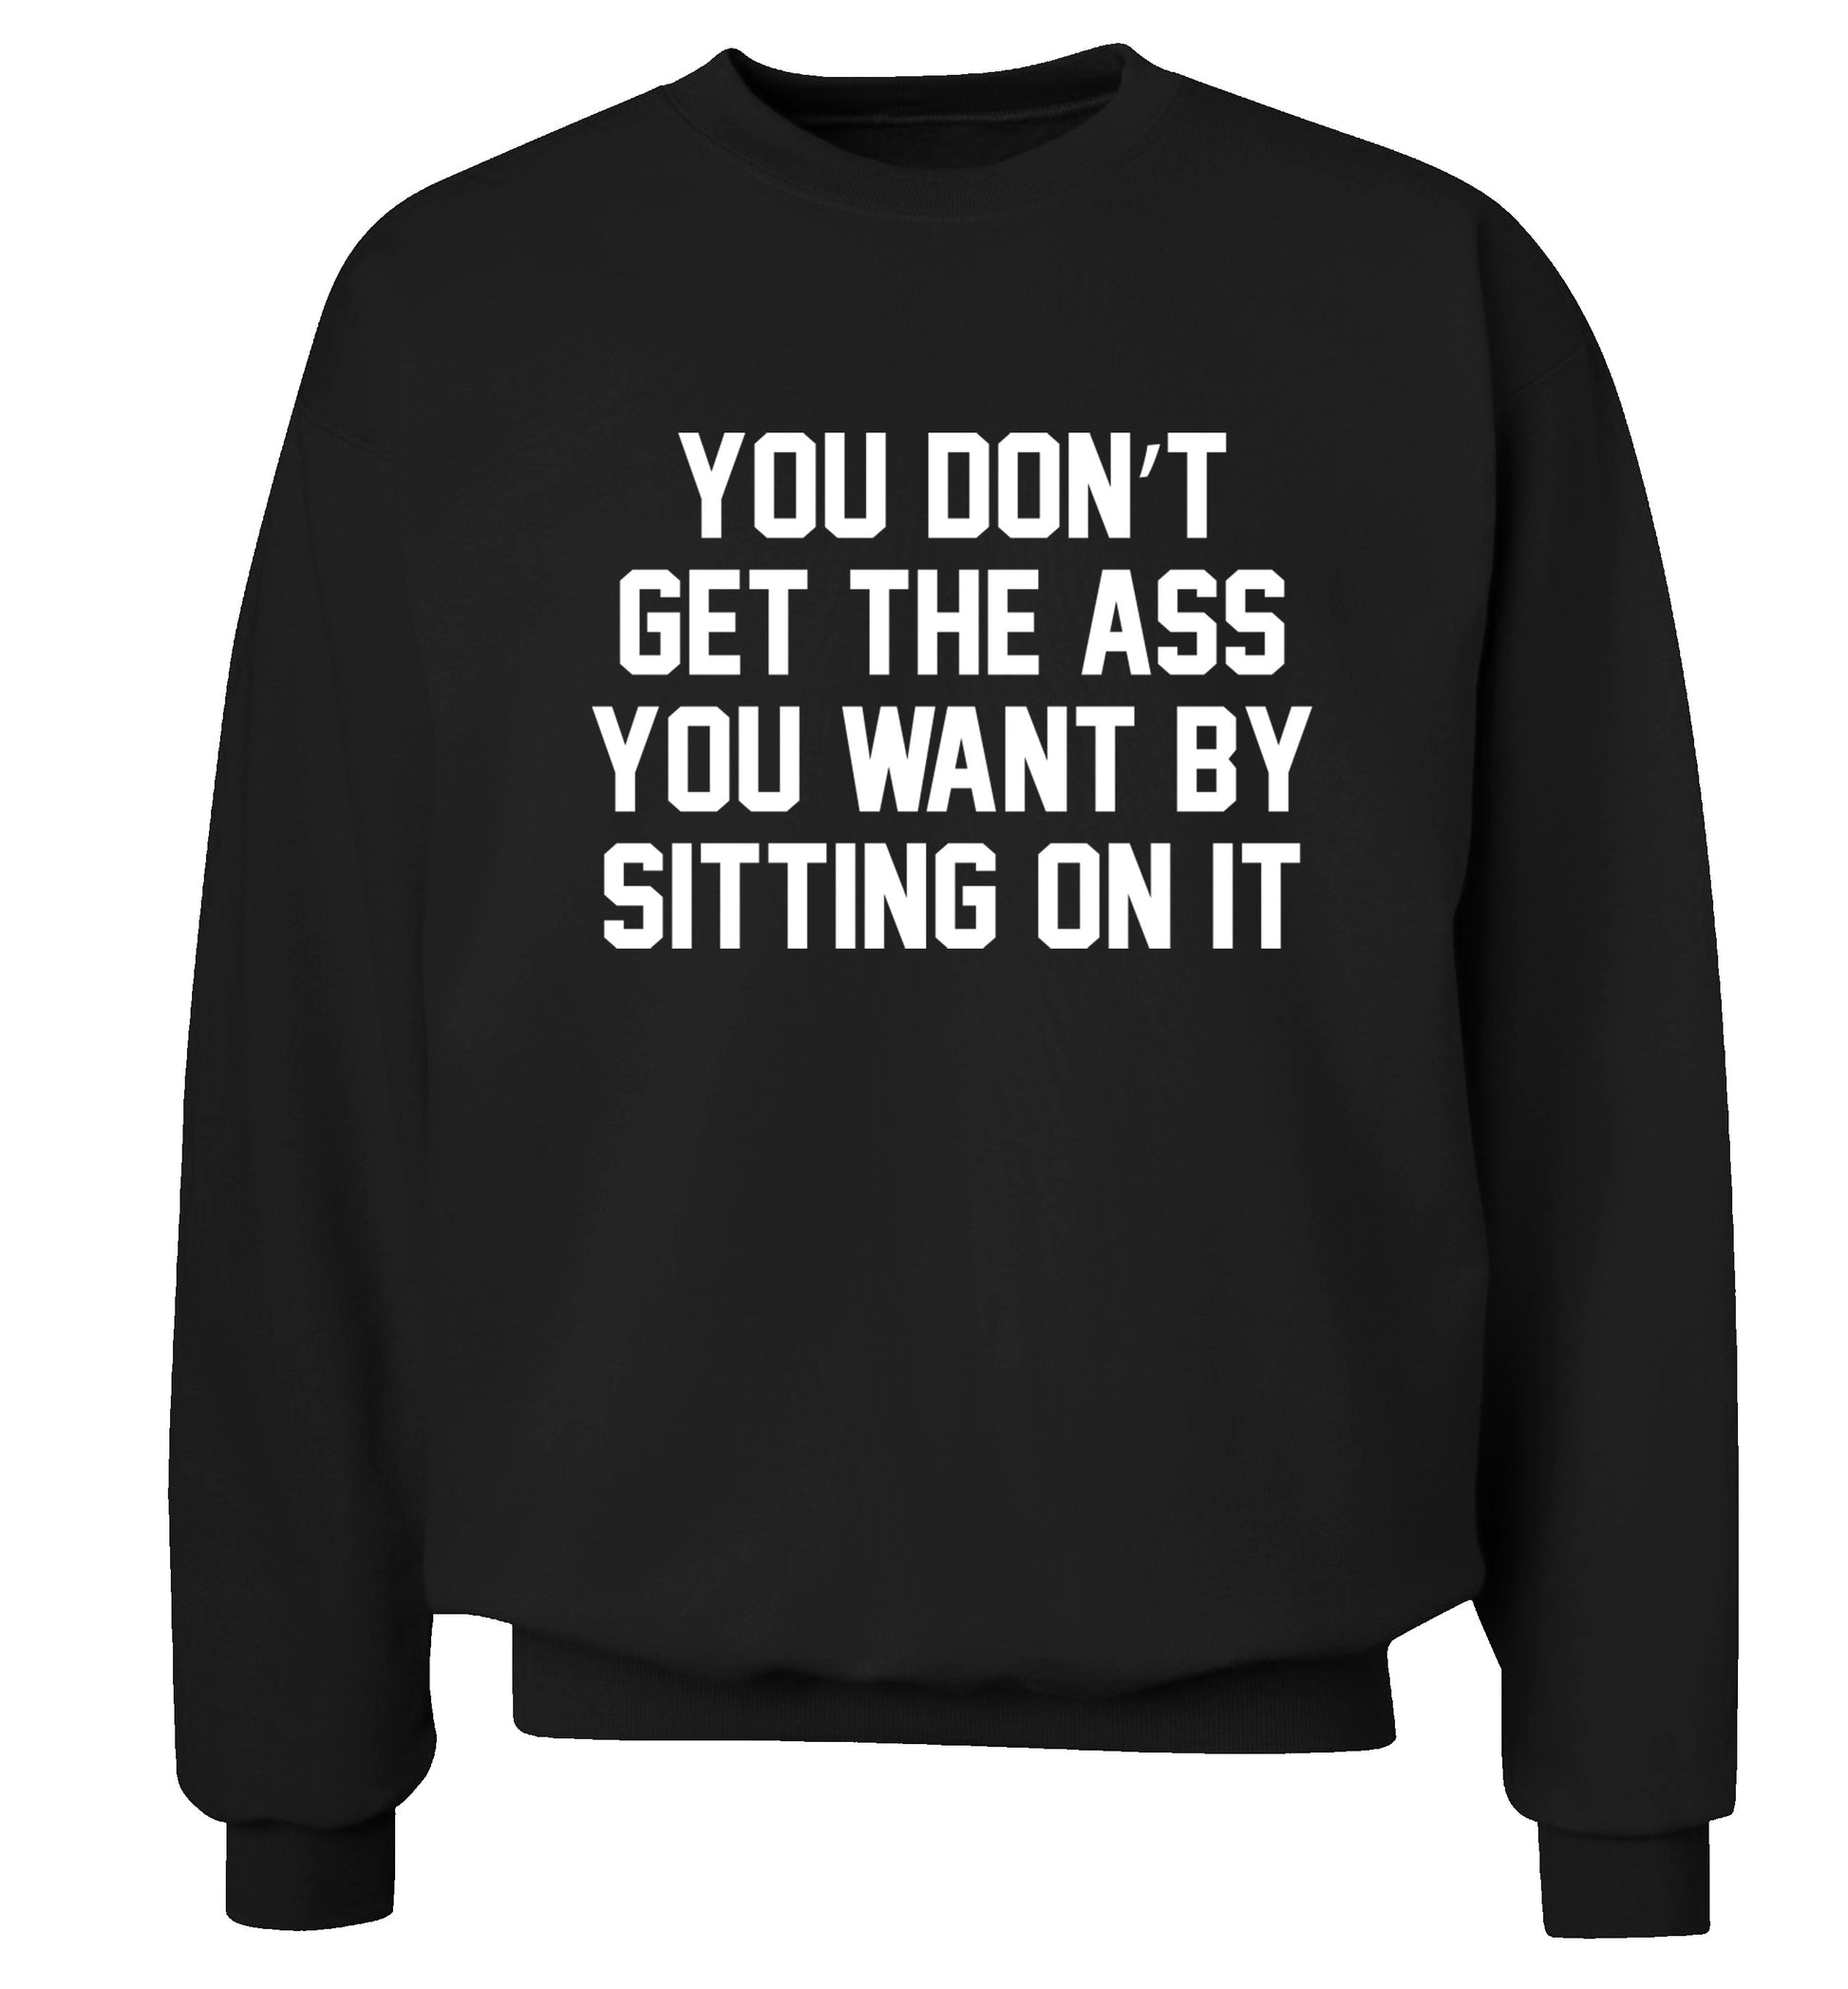 You don't get the ass you want by sitting on it Adult's unisex black Sweater 2XL